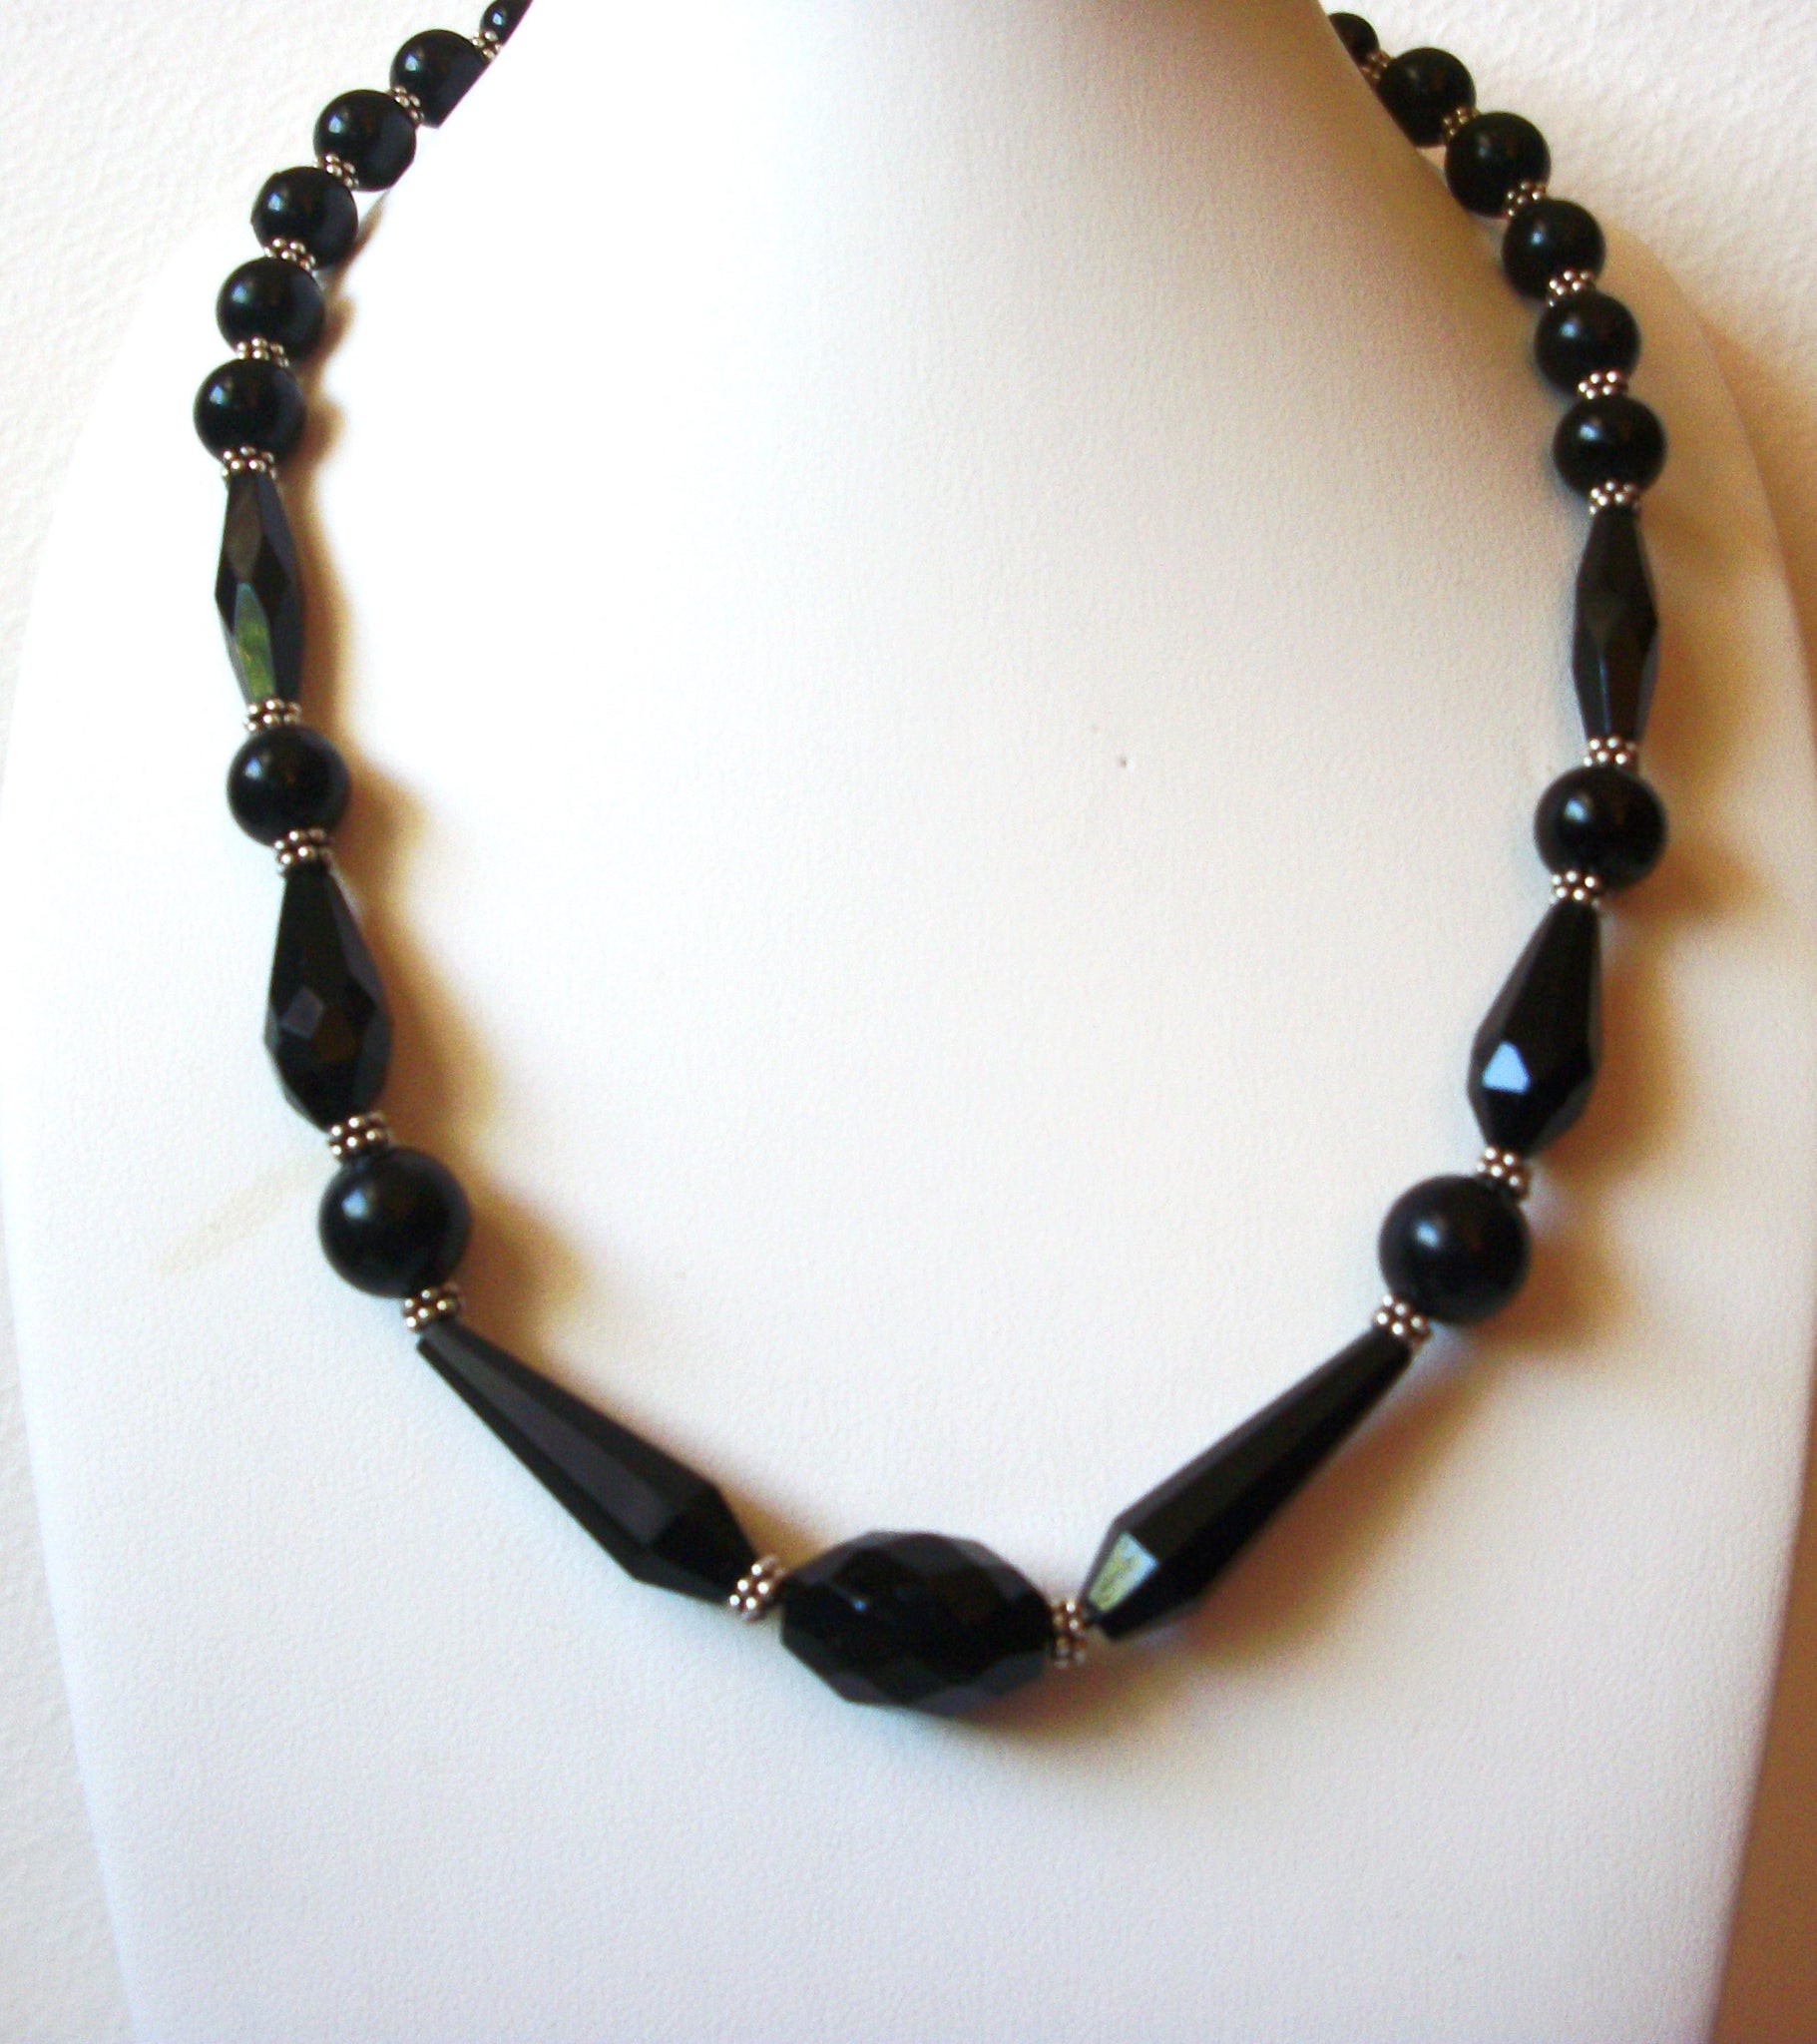 Black Czech Glass Beads Silver Tone Bali Spacers 18 Inch Necklace 71218D